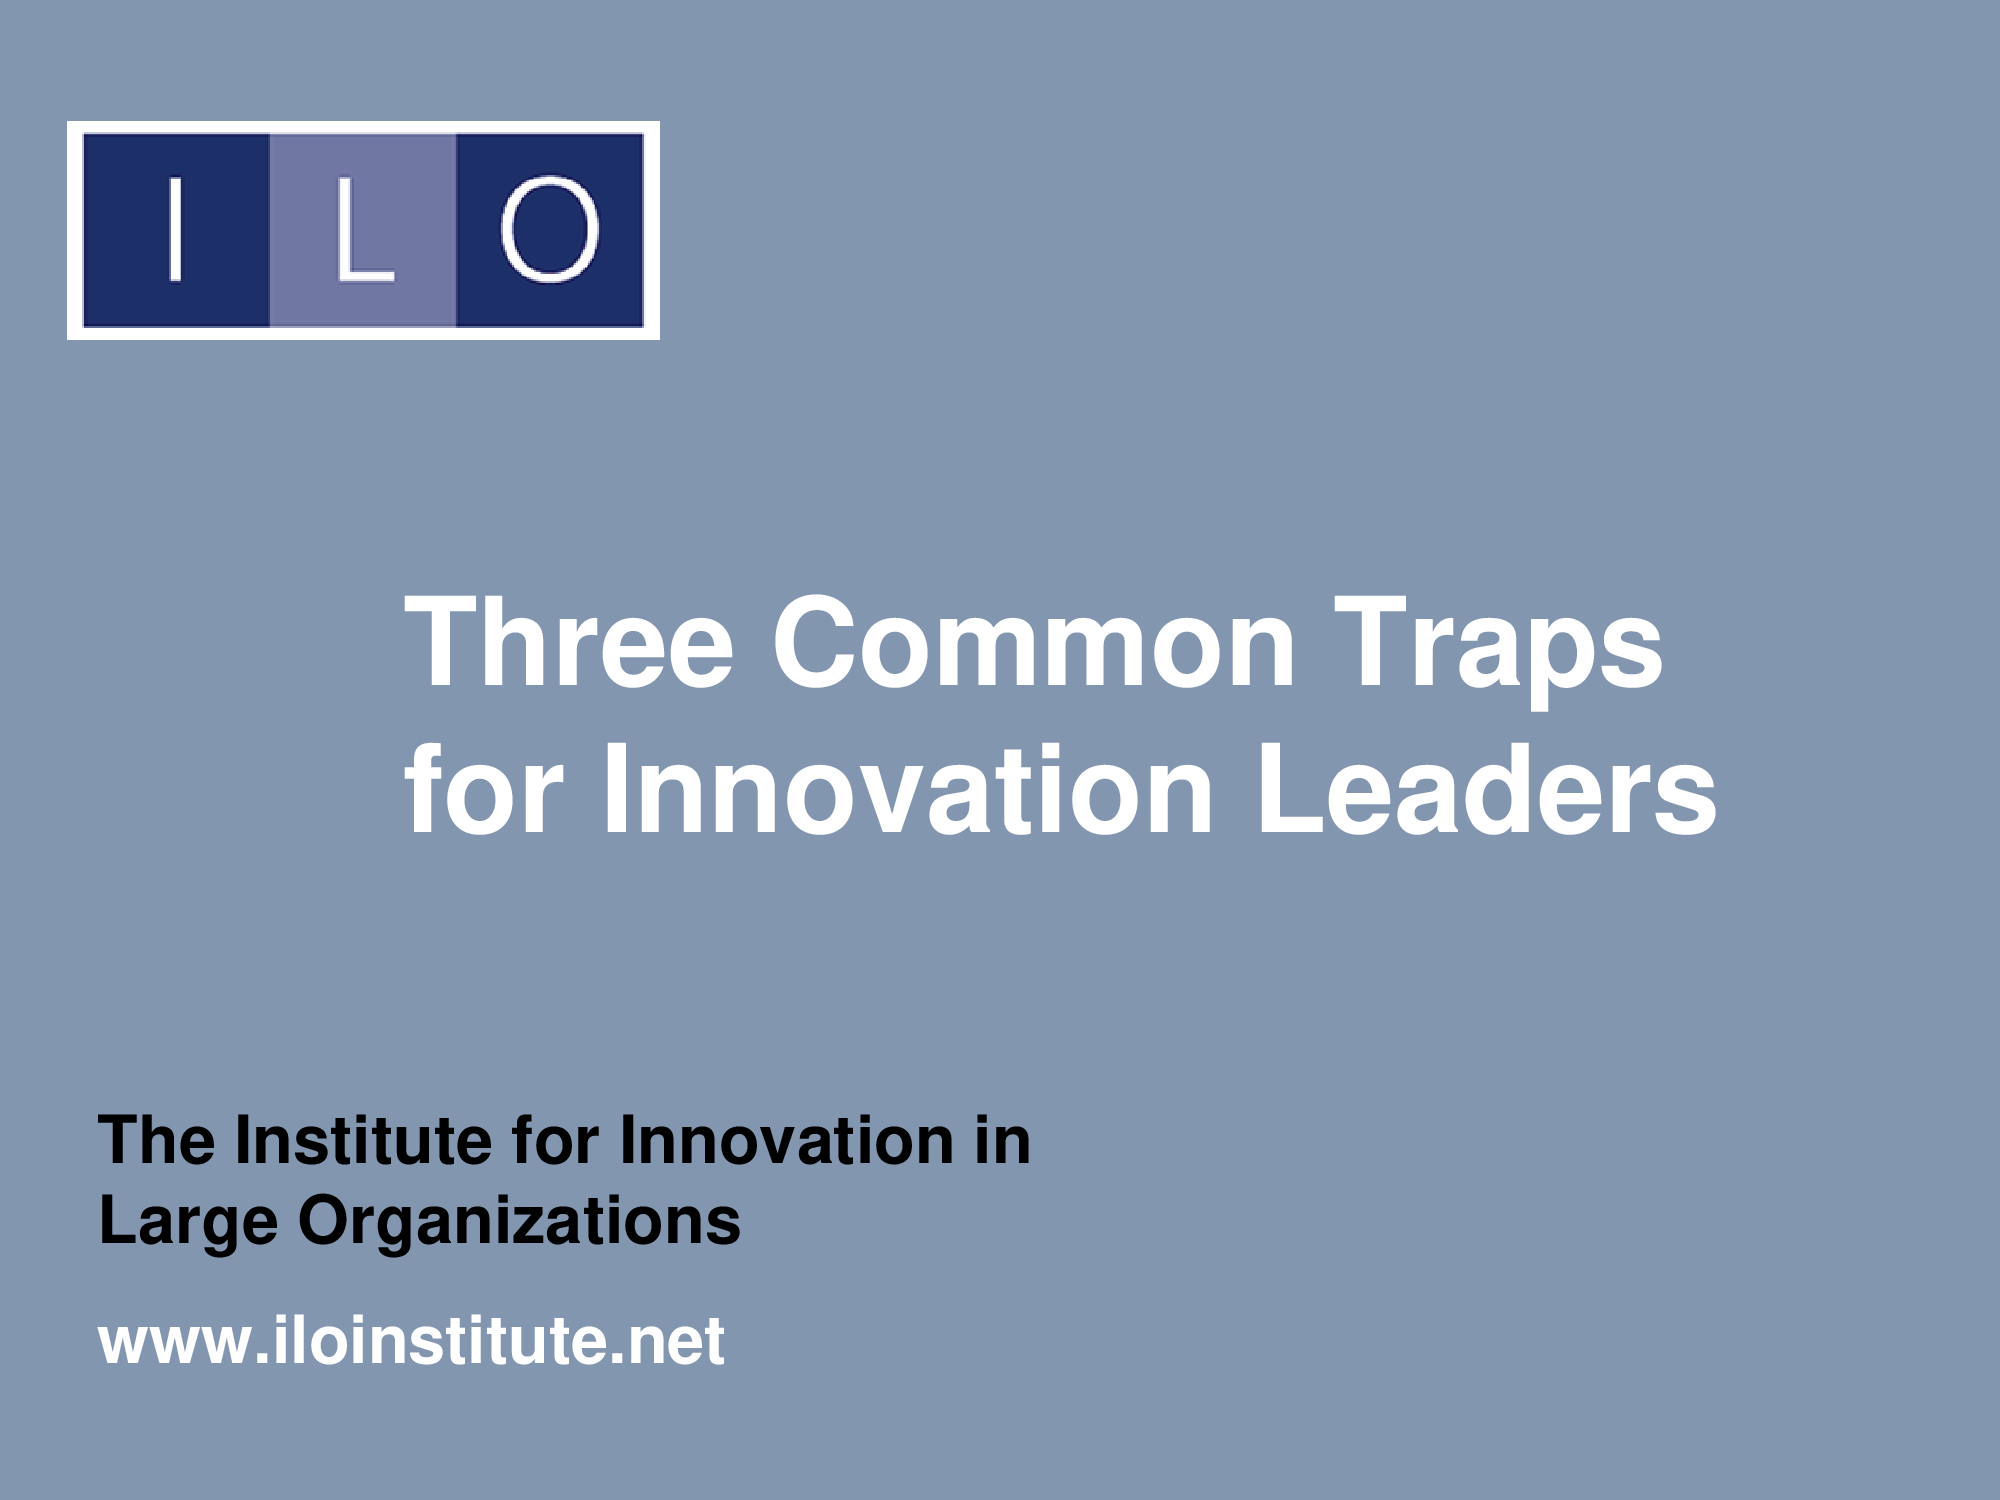 Traps for Innovation Leaders